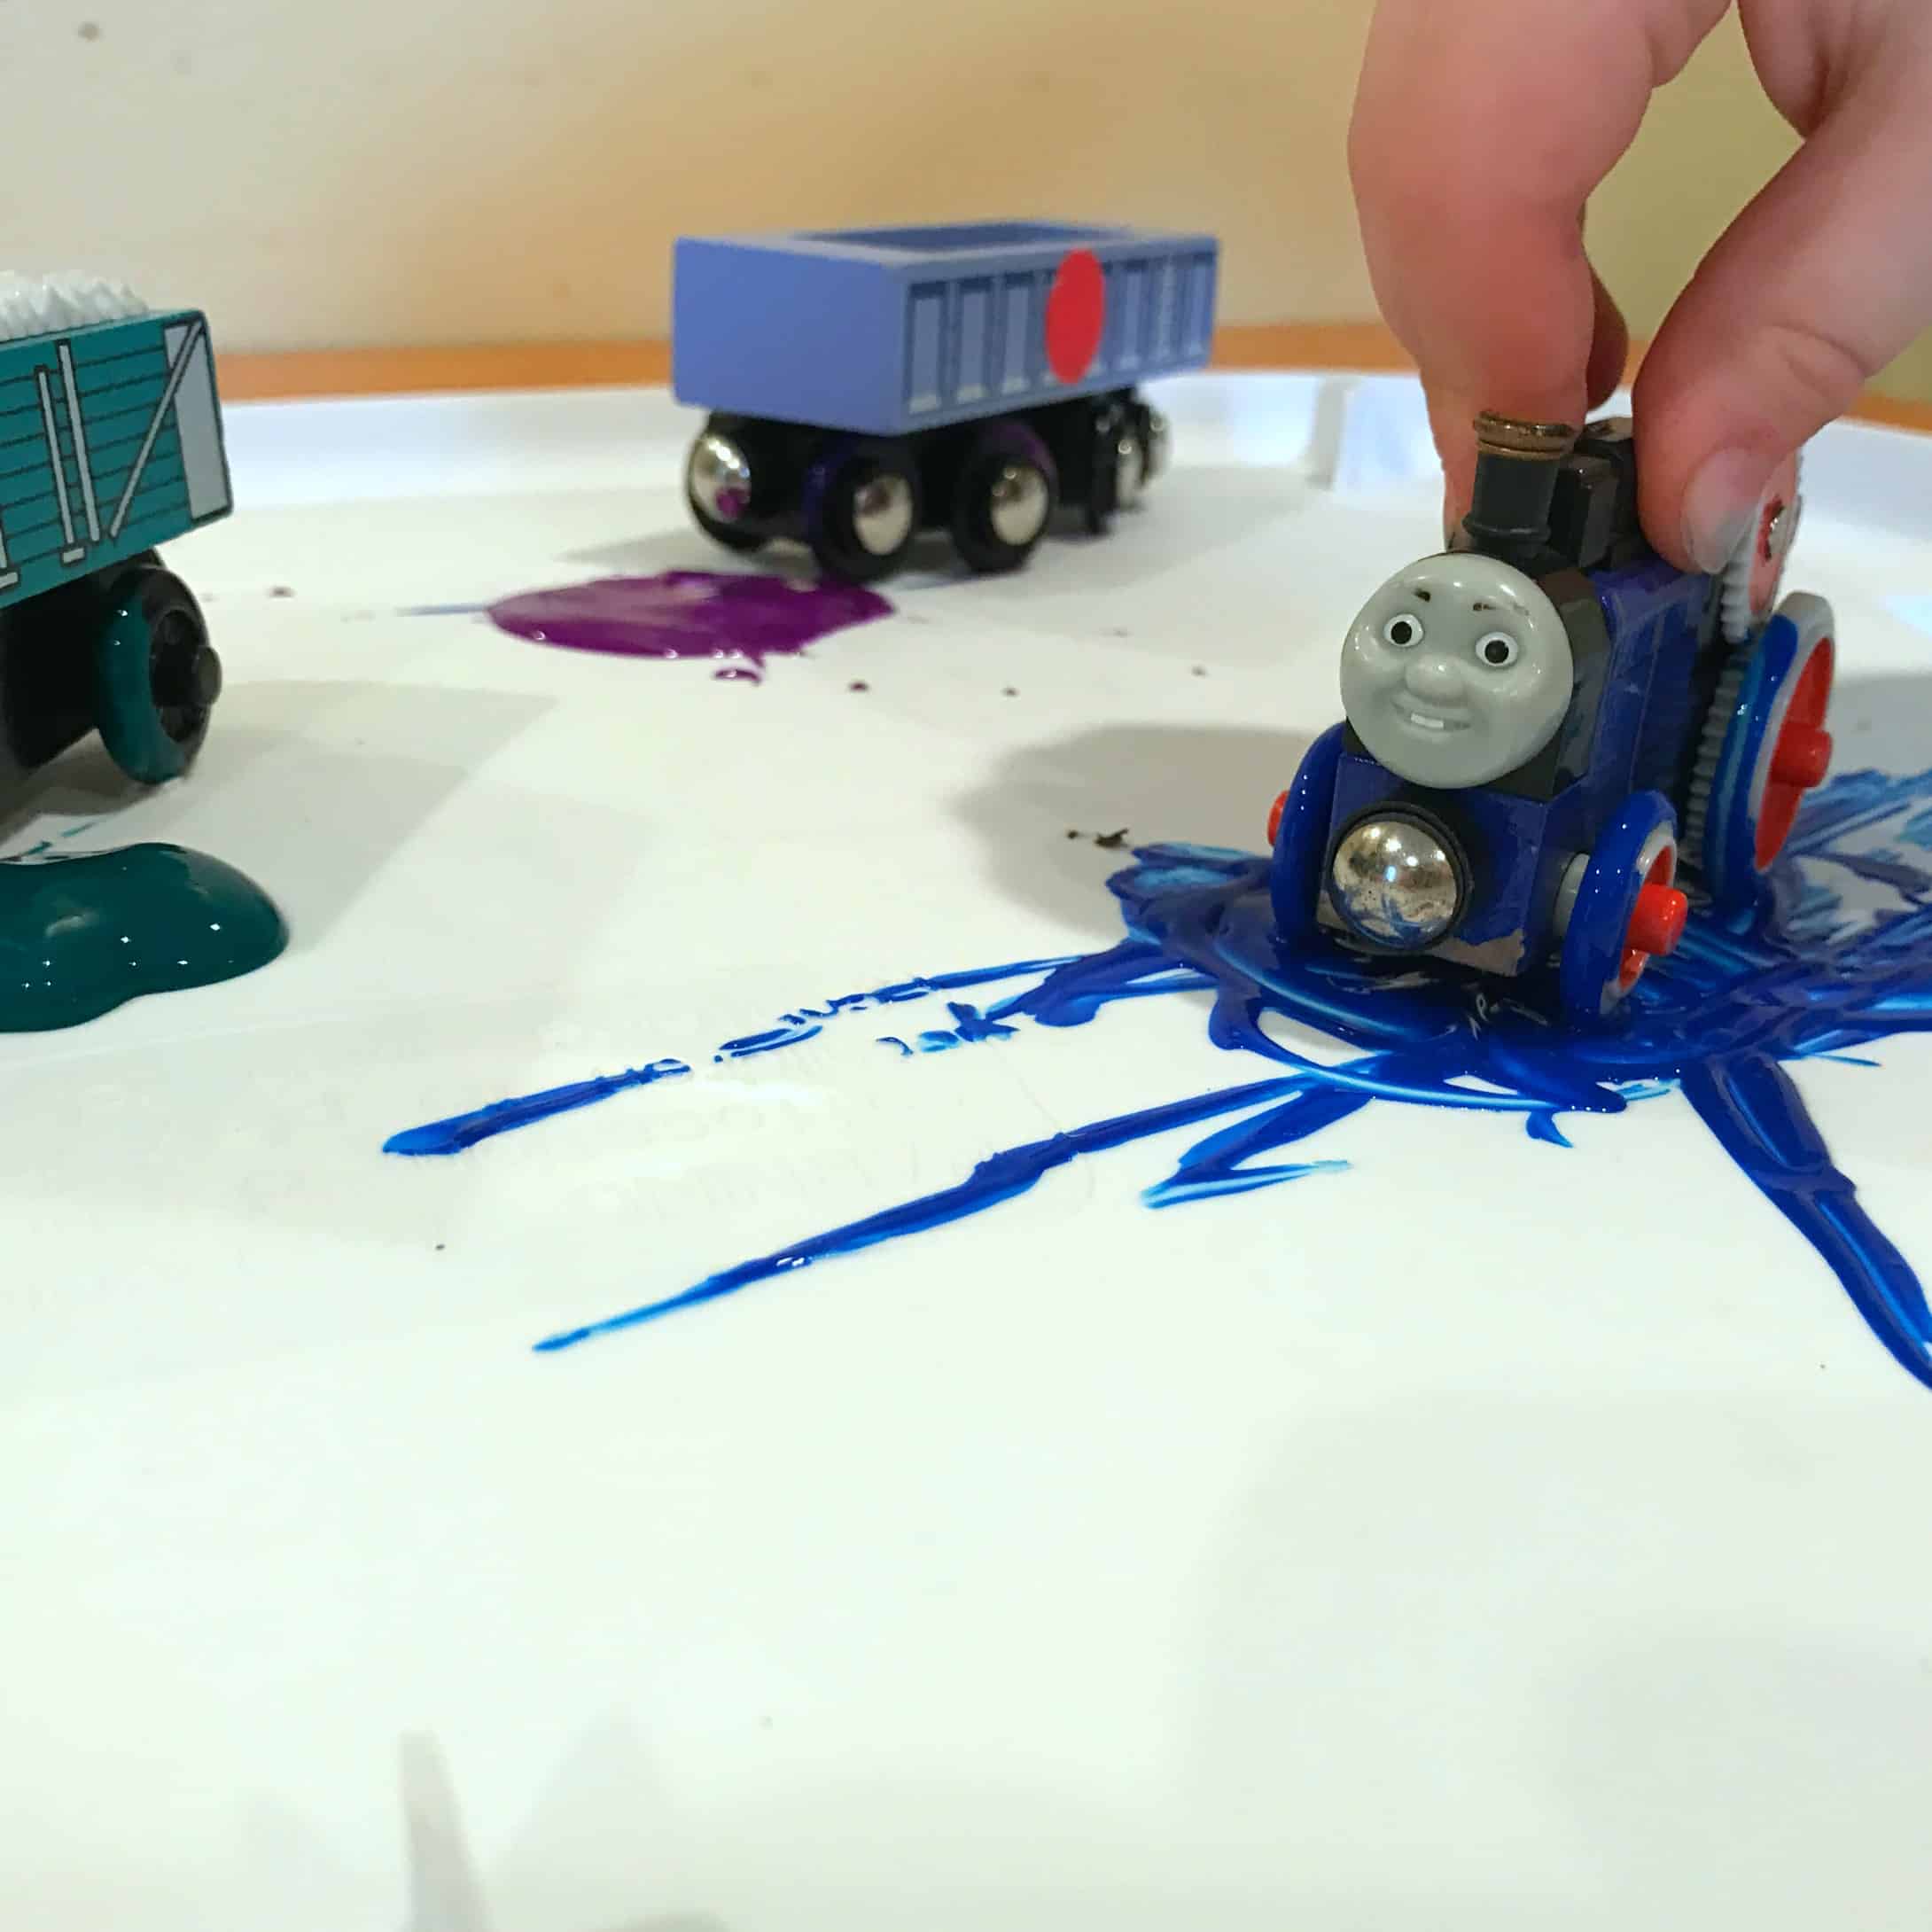 Painting with trains is a really great way to create a hands-on experience while learning colors! This fun method combines art with learning for toddlers.